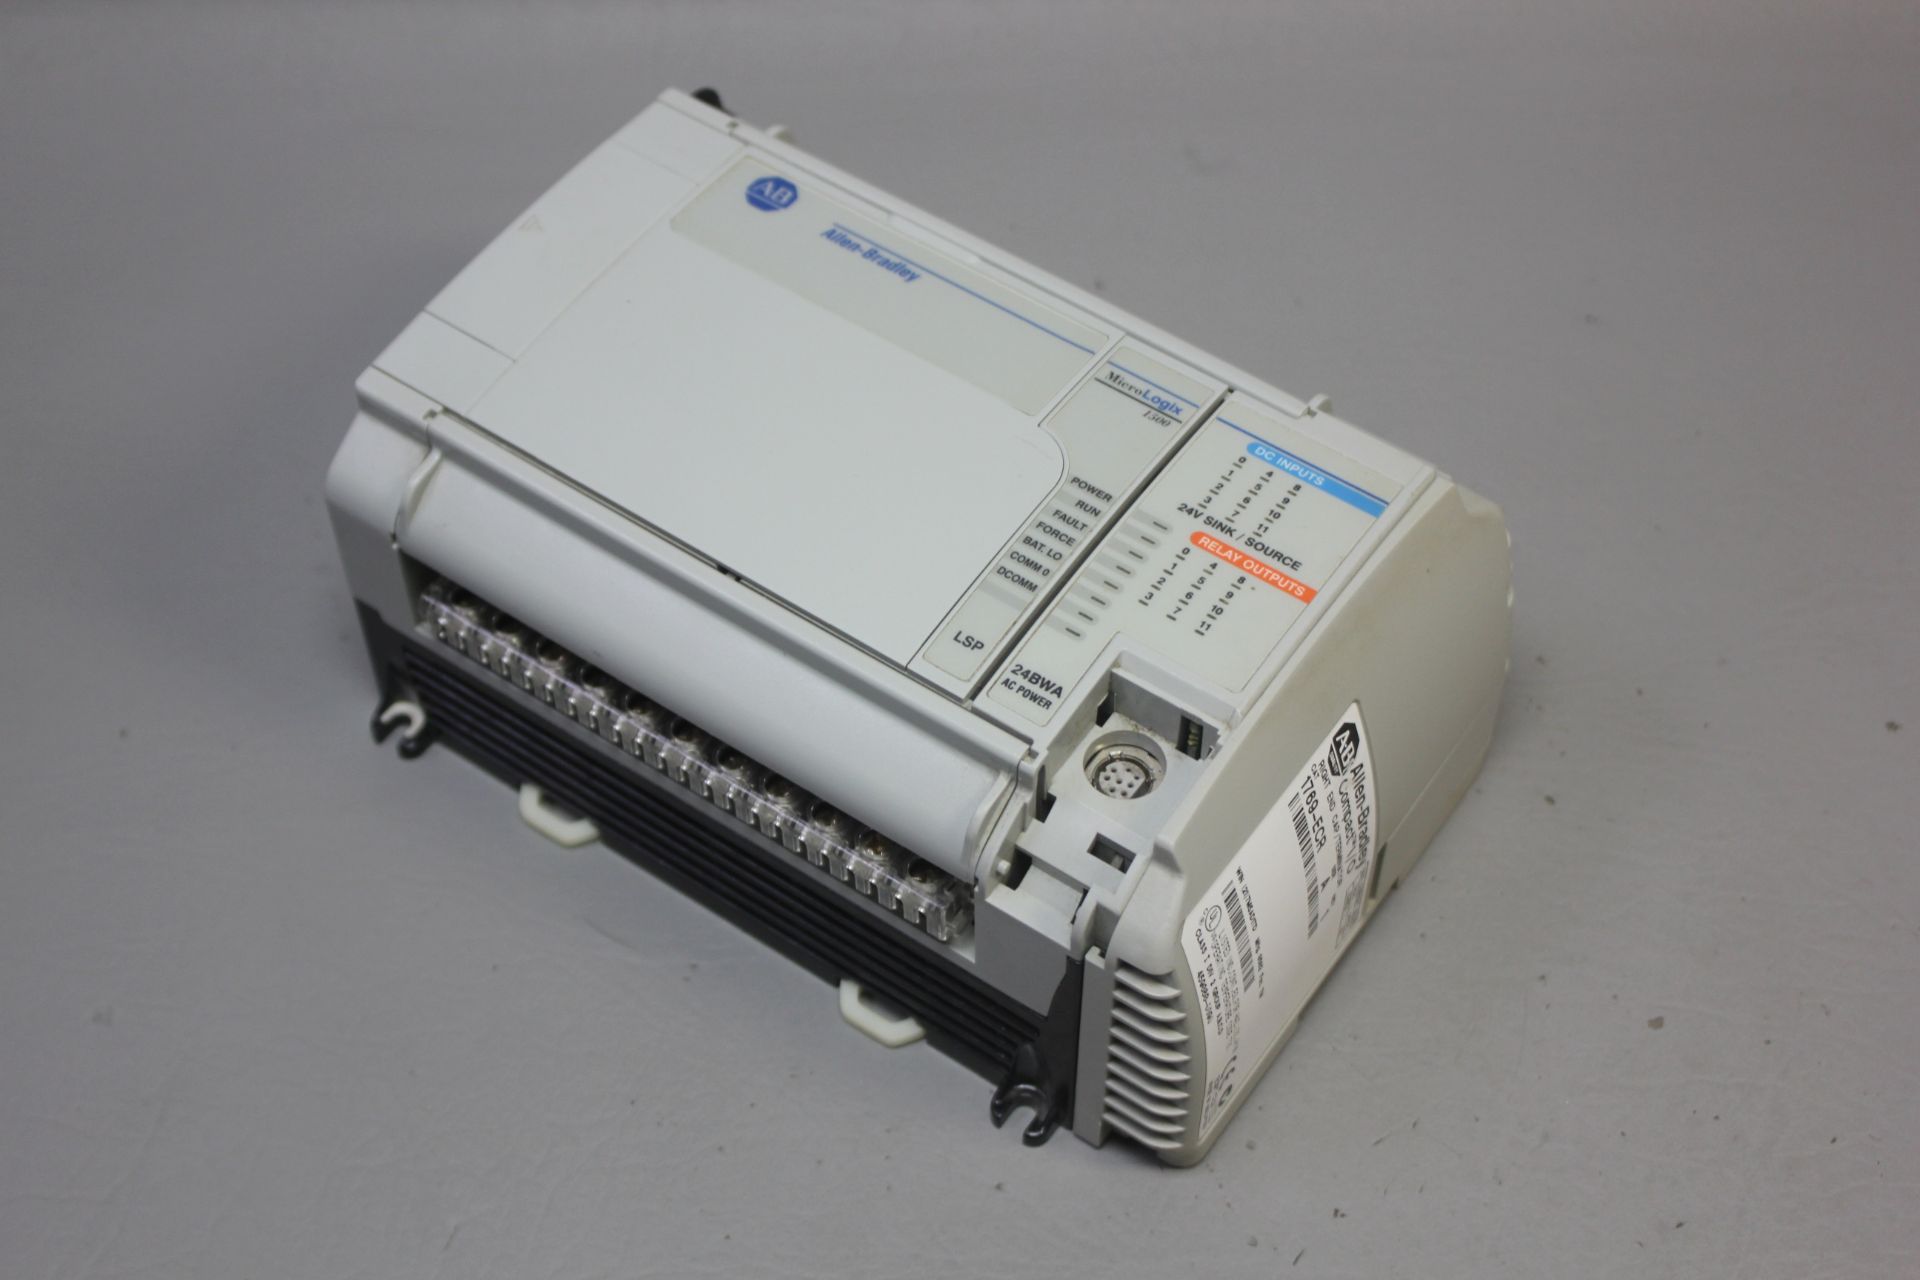 ALLEN BRADLEY MICROLOGIX 1500 CPU WITH BASE UNIT